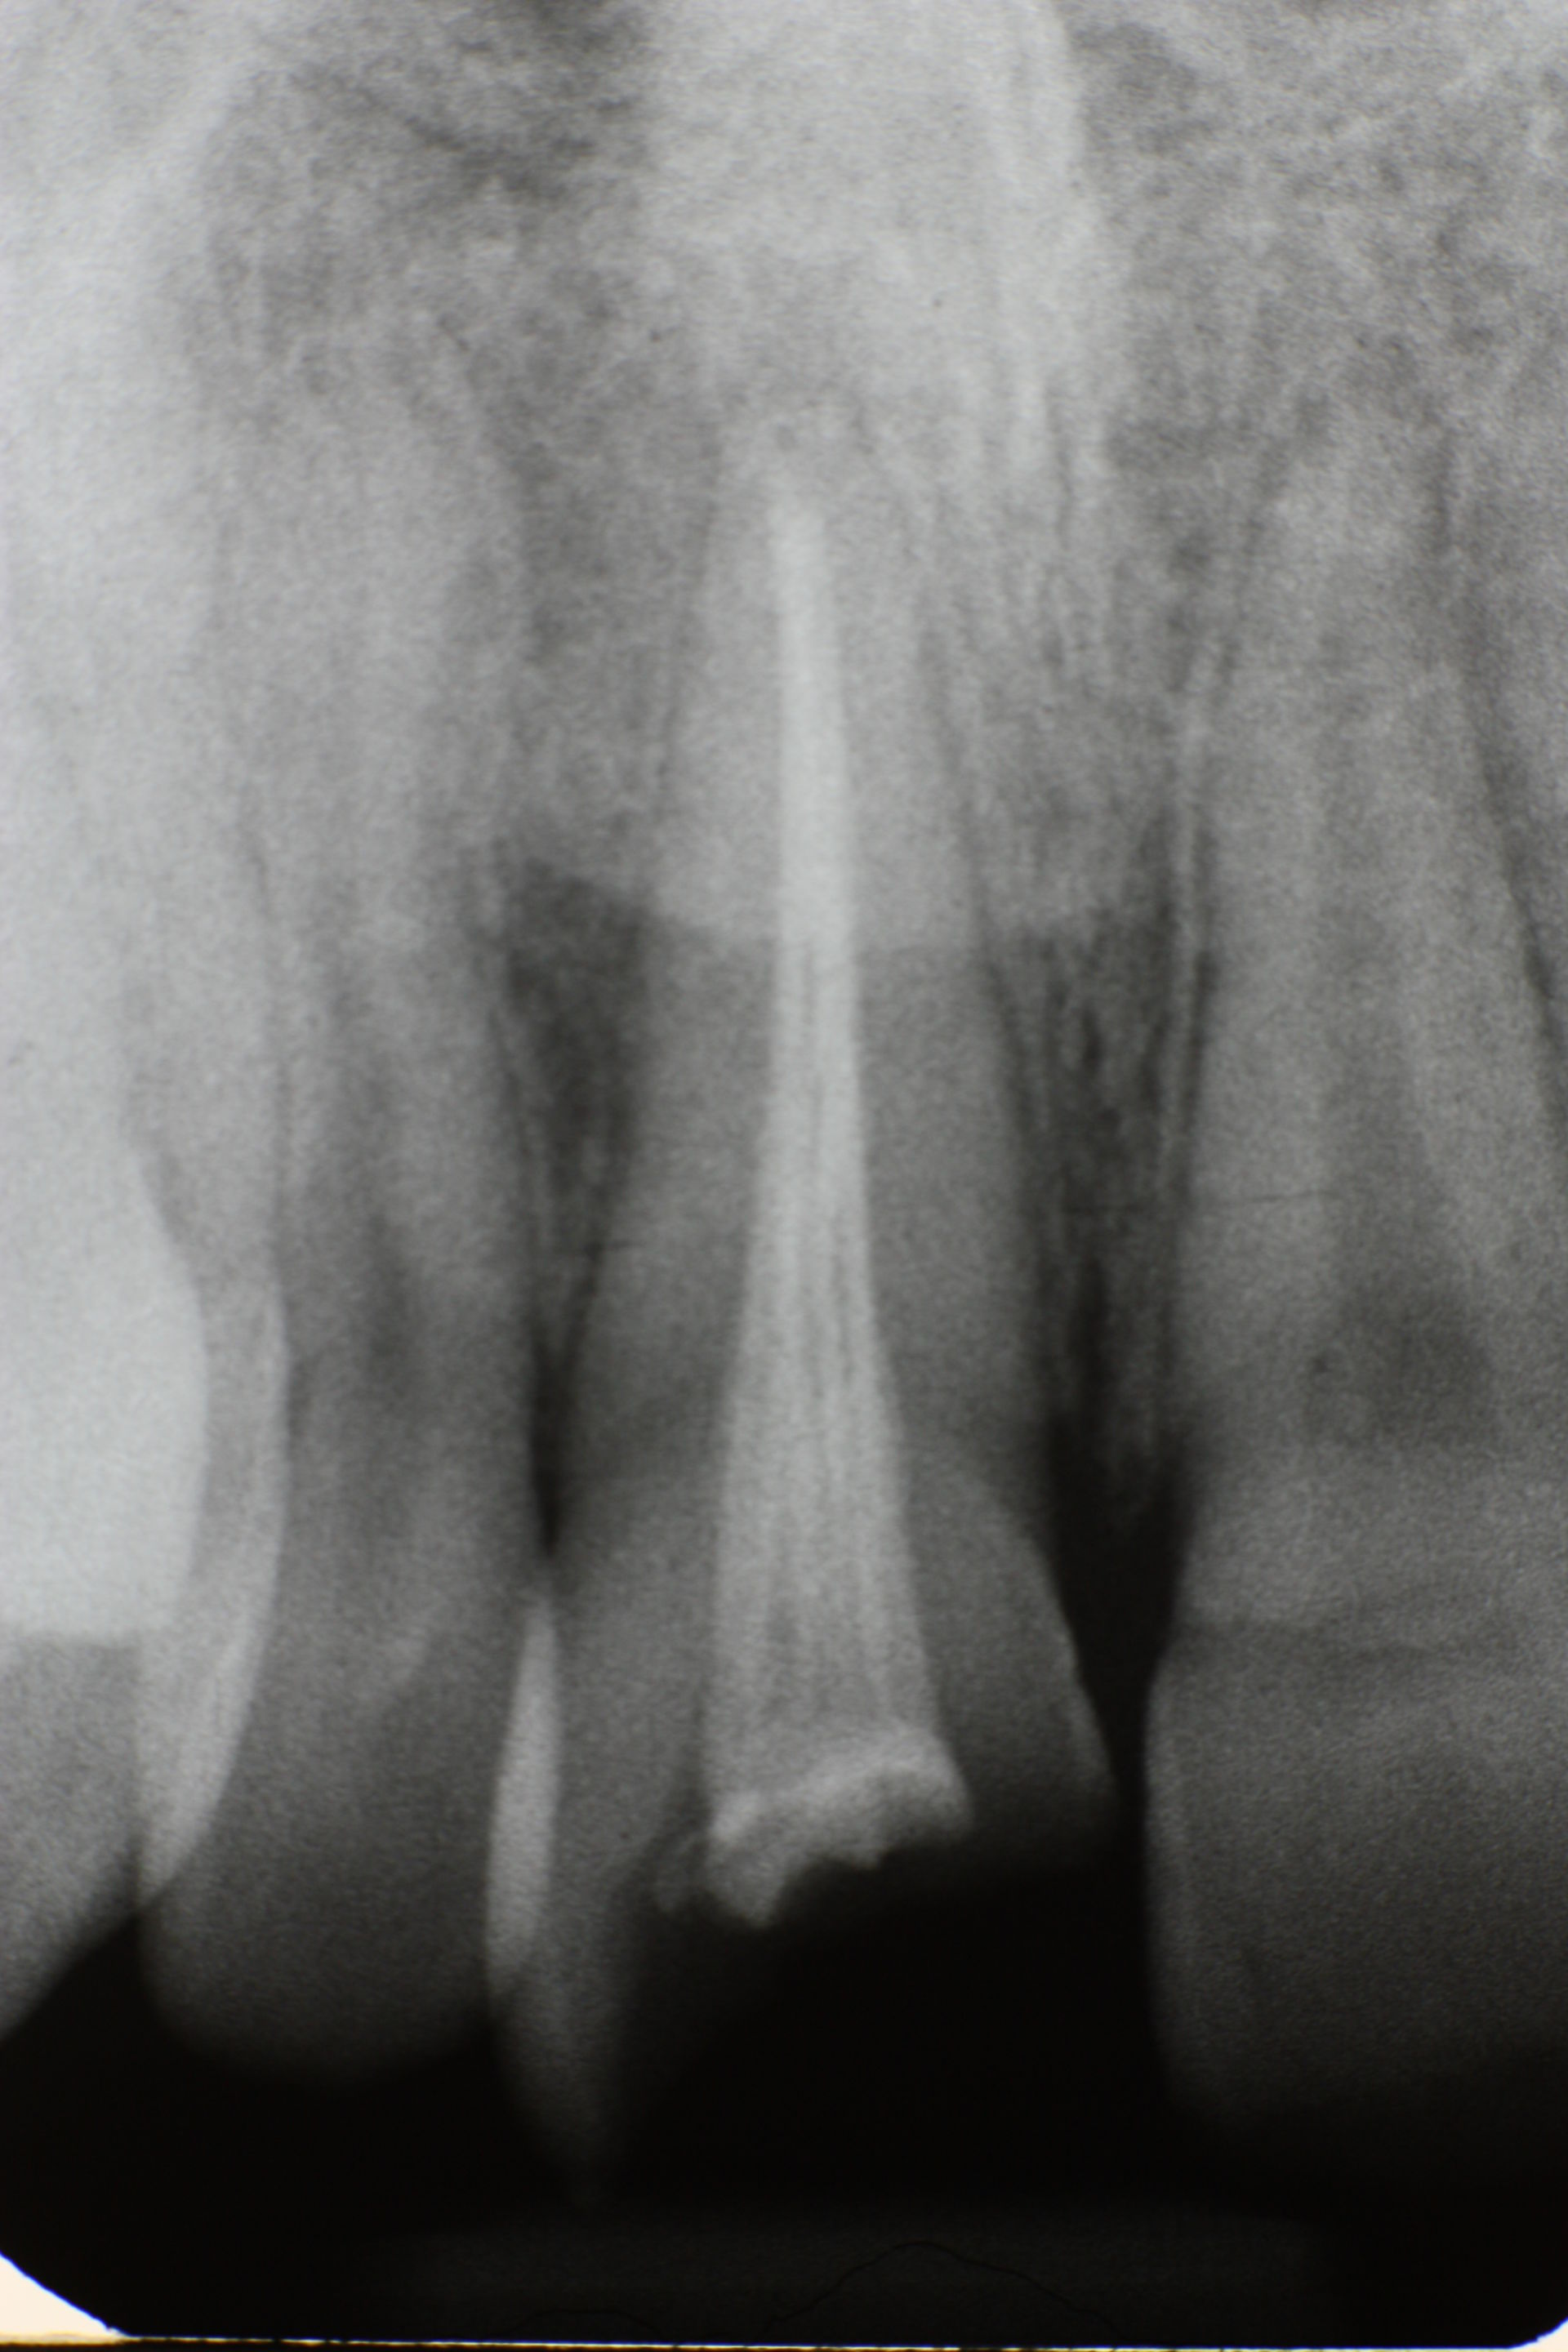 Trauma of the frontal tooth